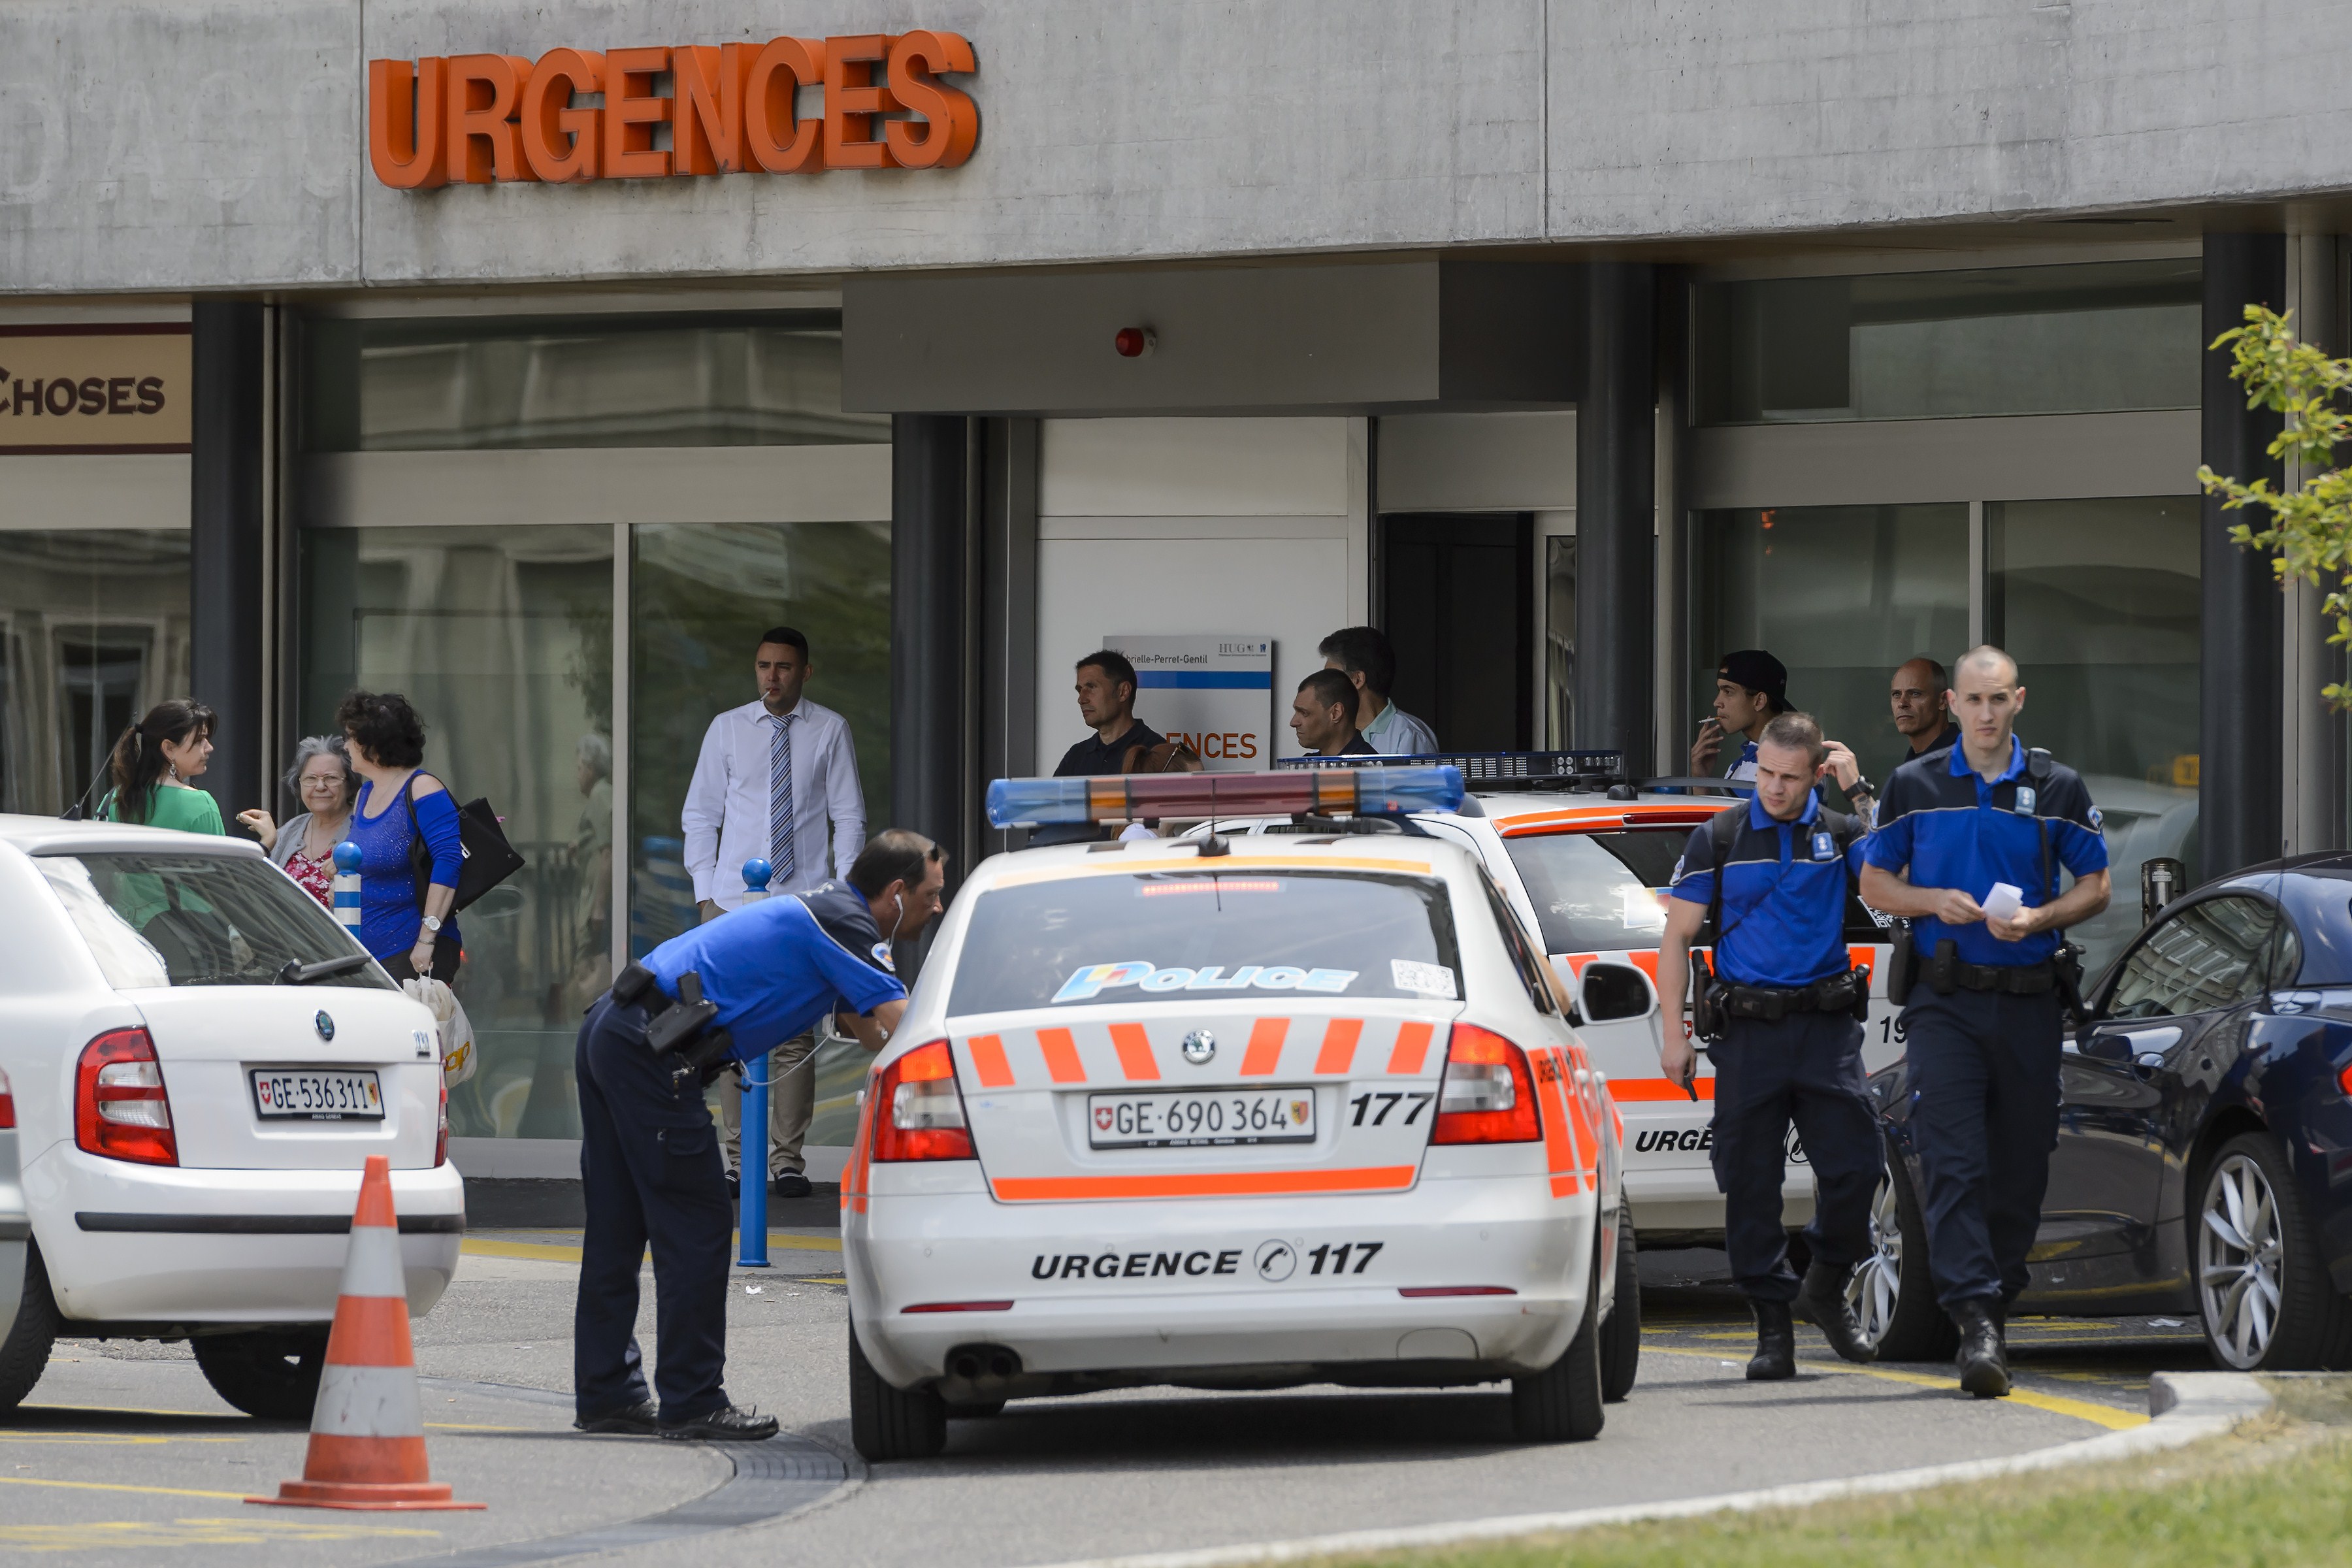 Police and security outside the Geneva hospital where Kerry was brought for care after the crash. (Getty)